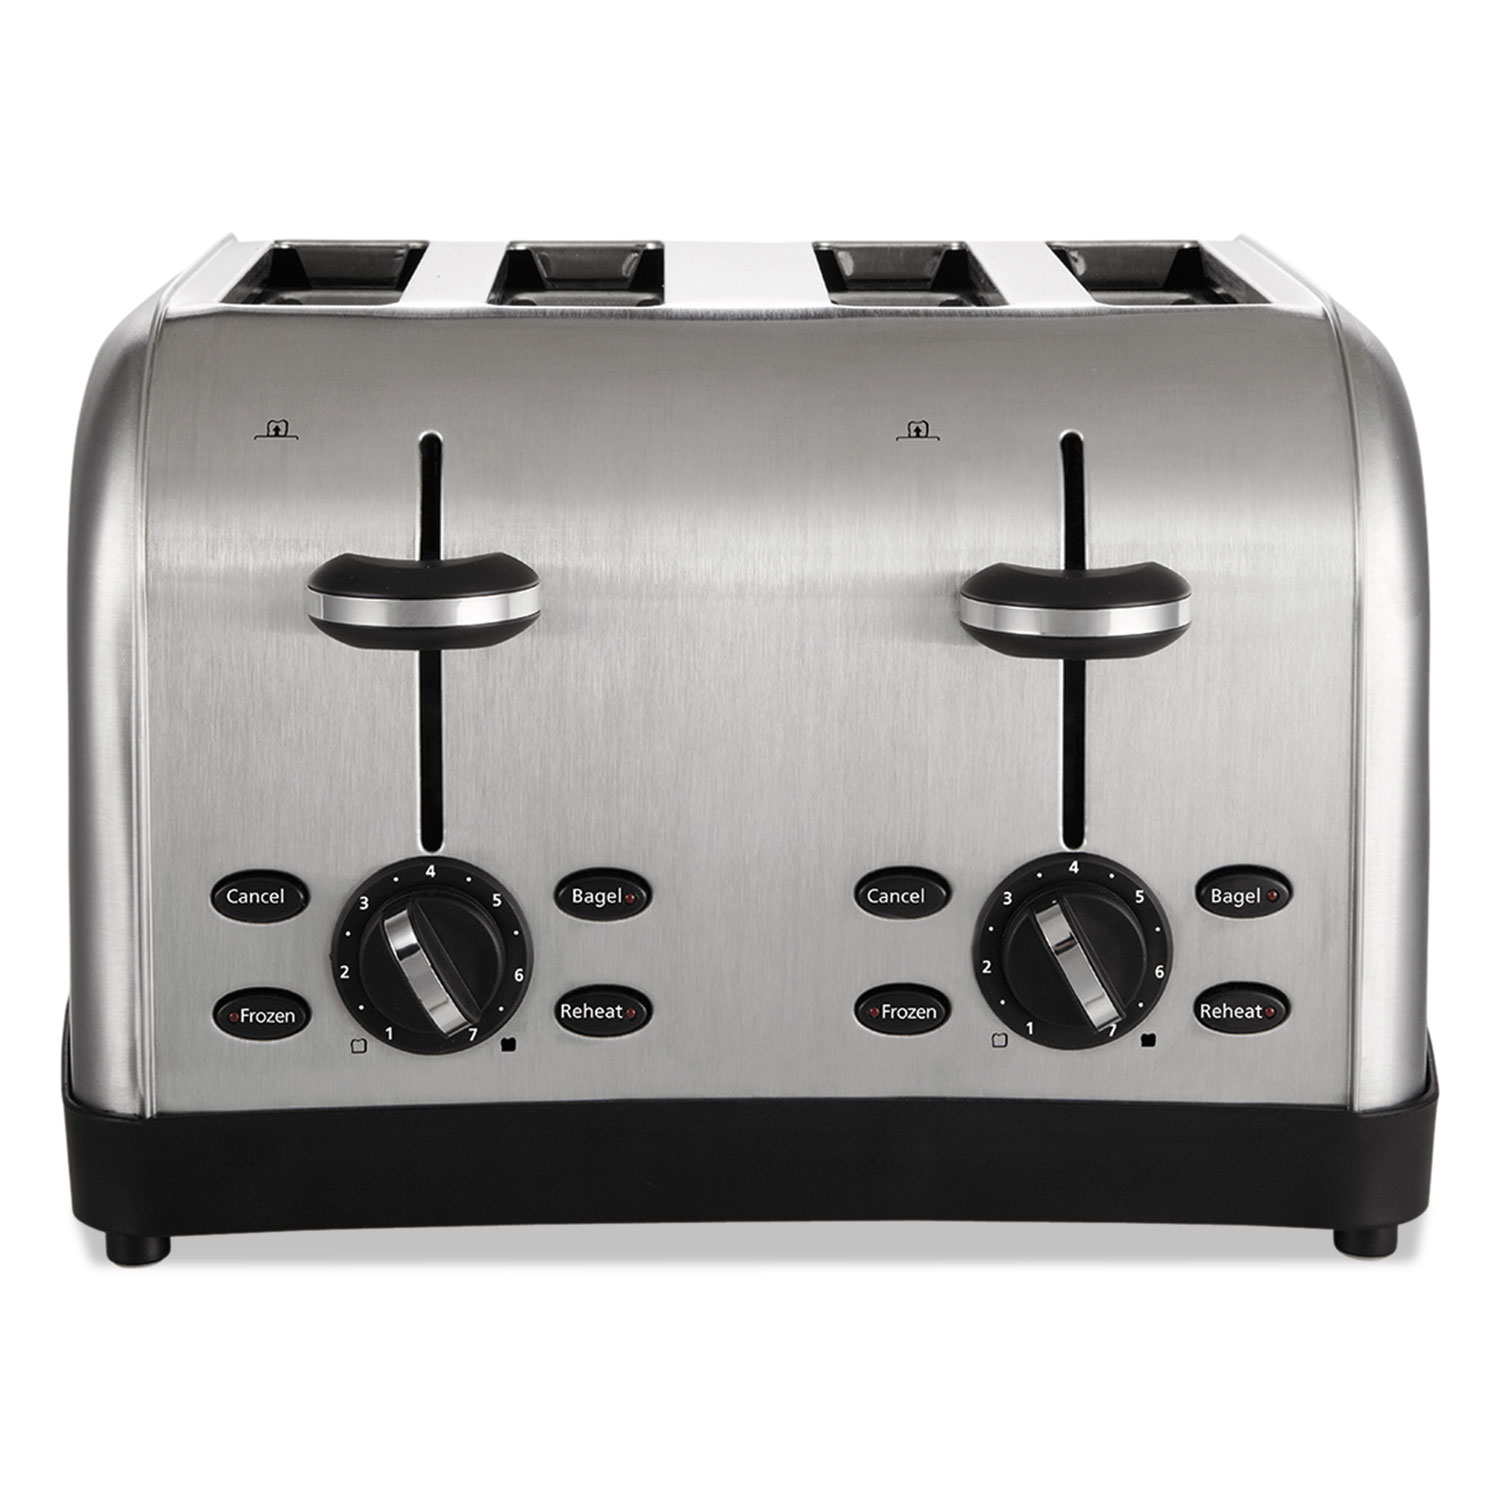  Oster TSSTTRWF4SSHP Extra Wide Slot Toaster, 4-Slice, 12 3/4 x 13 x 8 1/2, Stainless Steel (OSRRWF4S) 